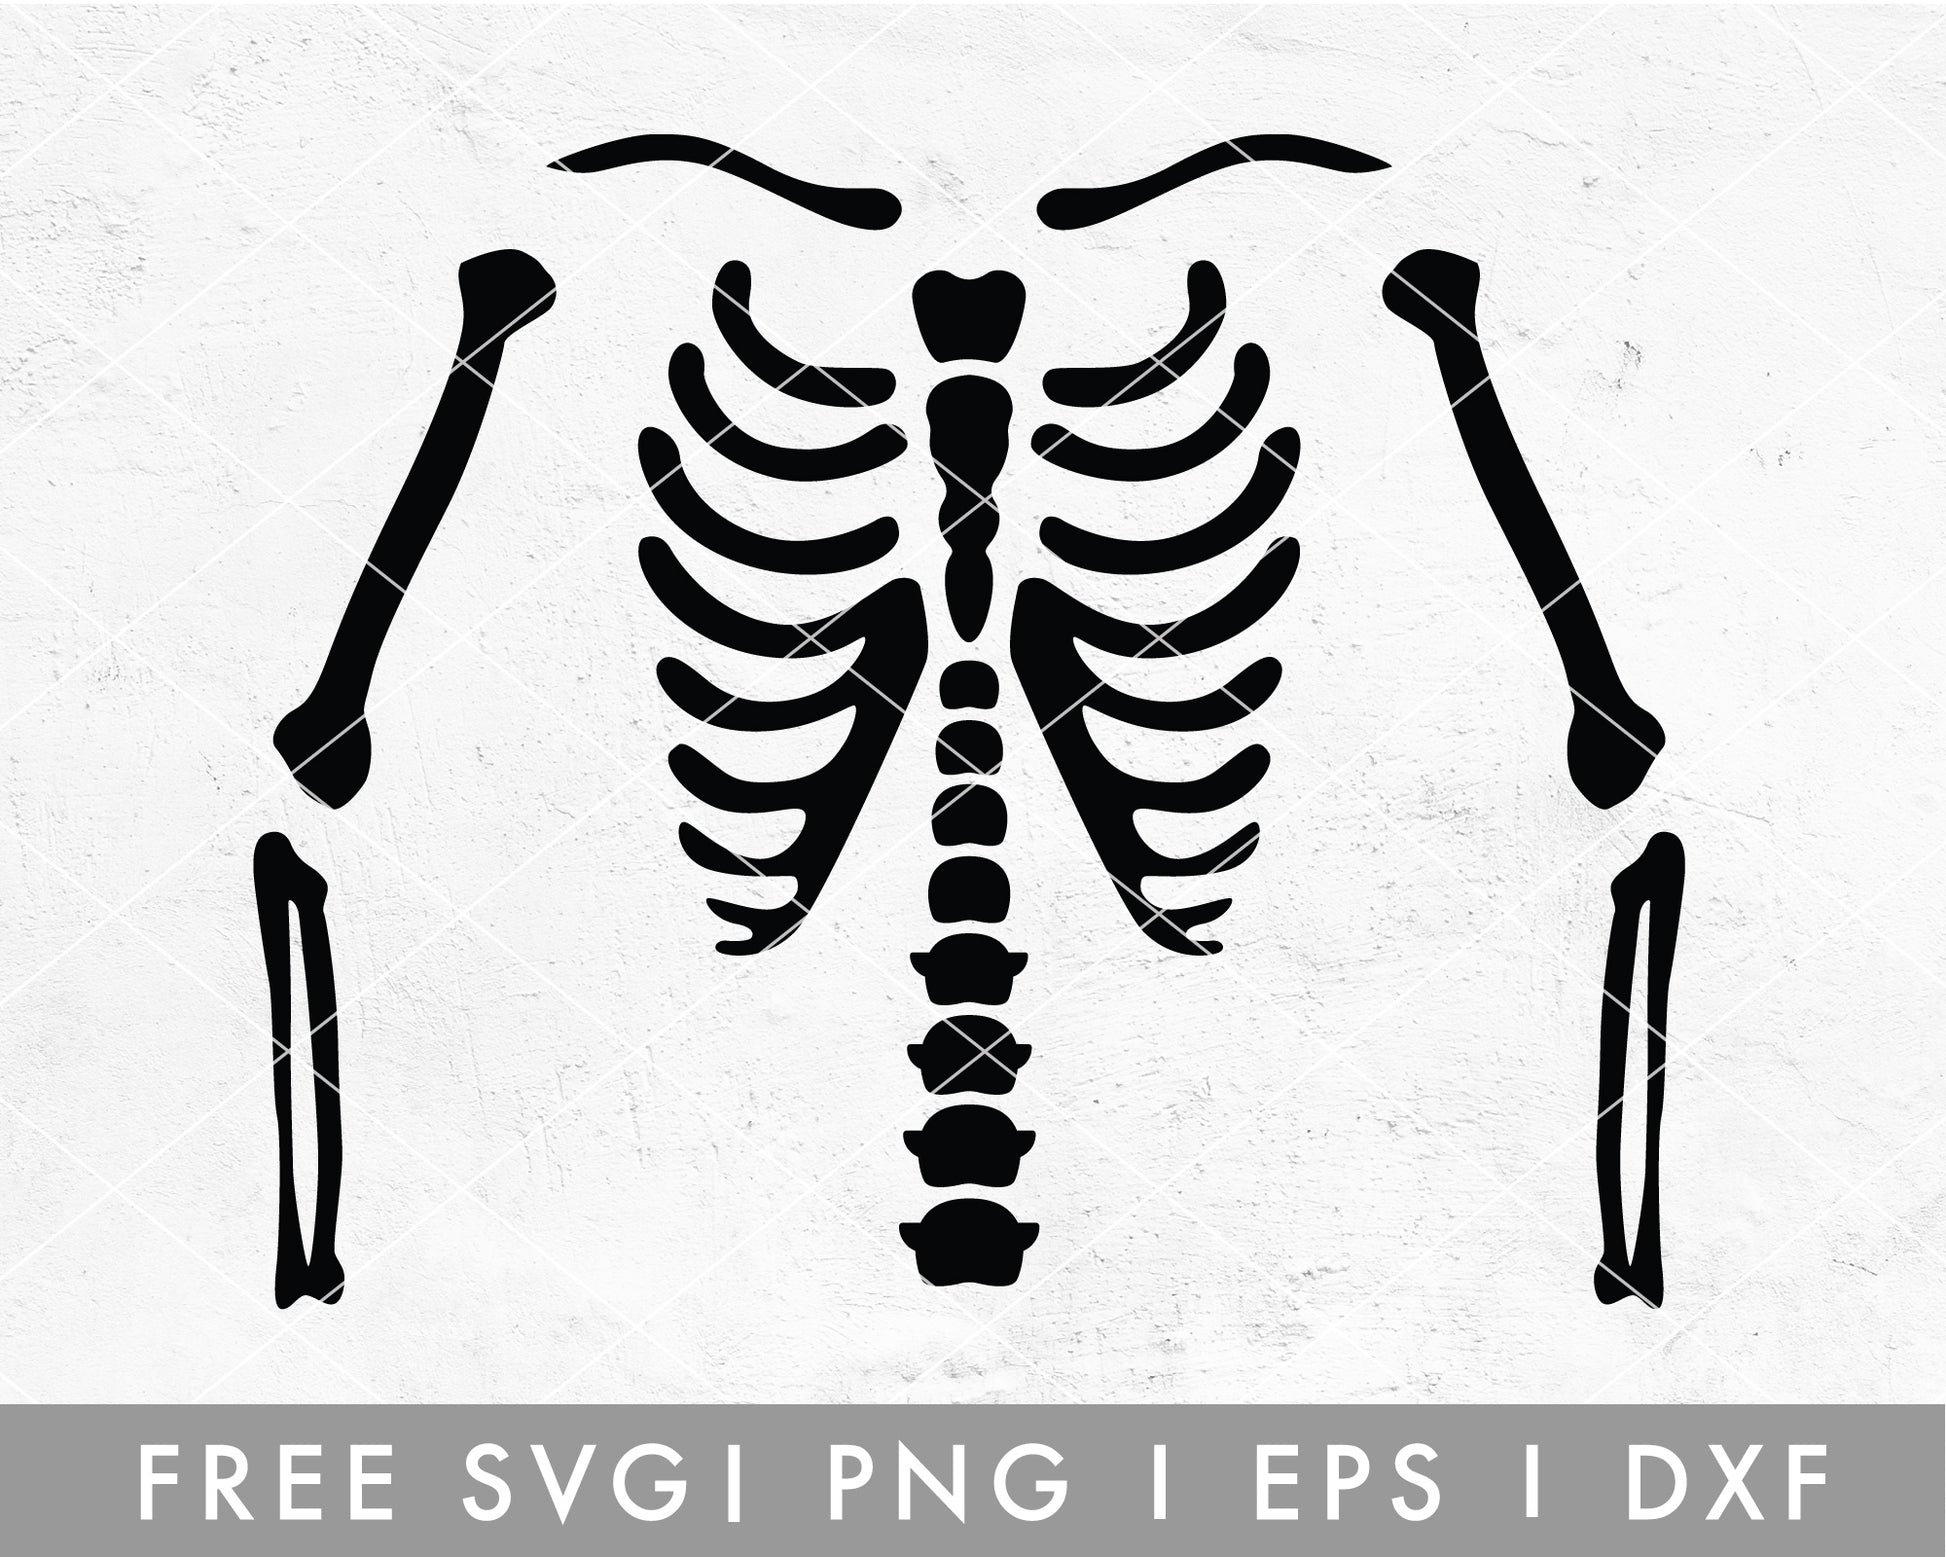 FREE Skeleton T-shirt Making SVG Cut File for Cricut, Cameo Silhouette 